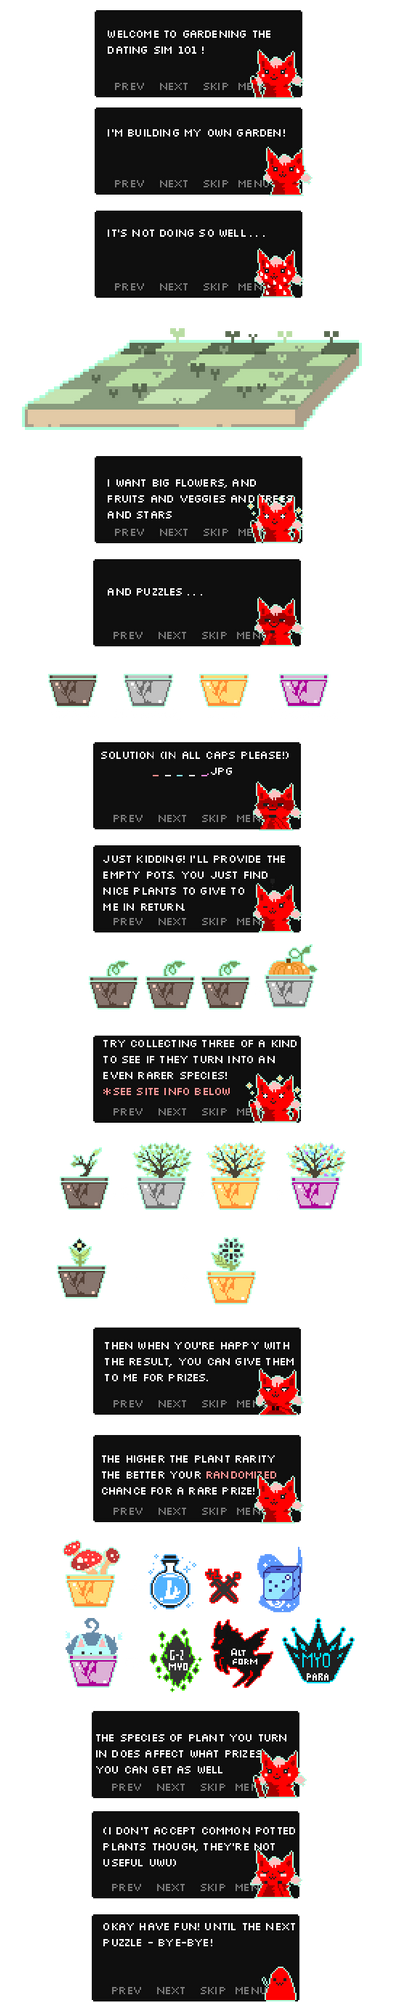 Gardening And How To A Guide By Stygian Shade On Deviantart